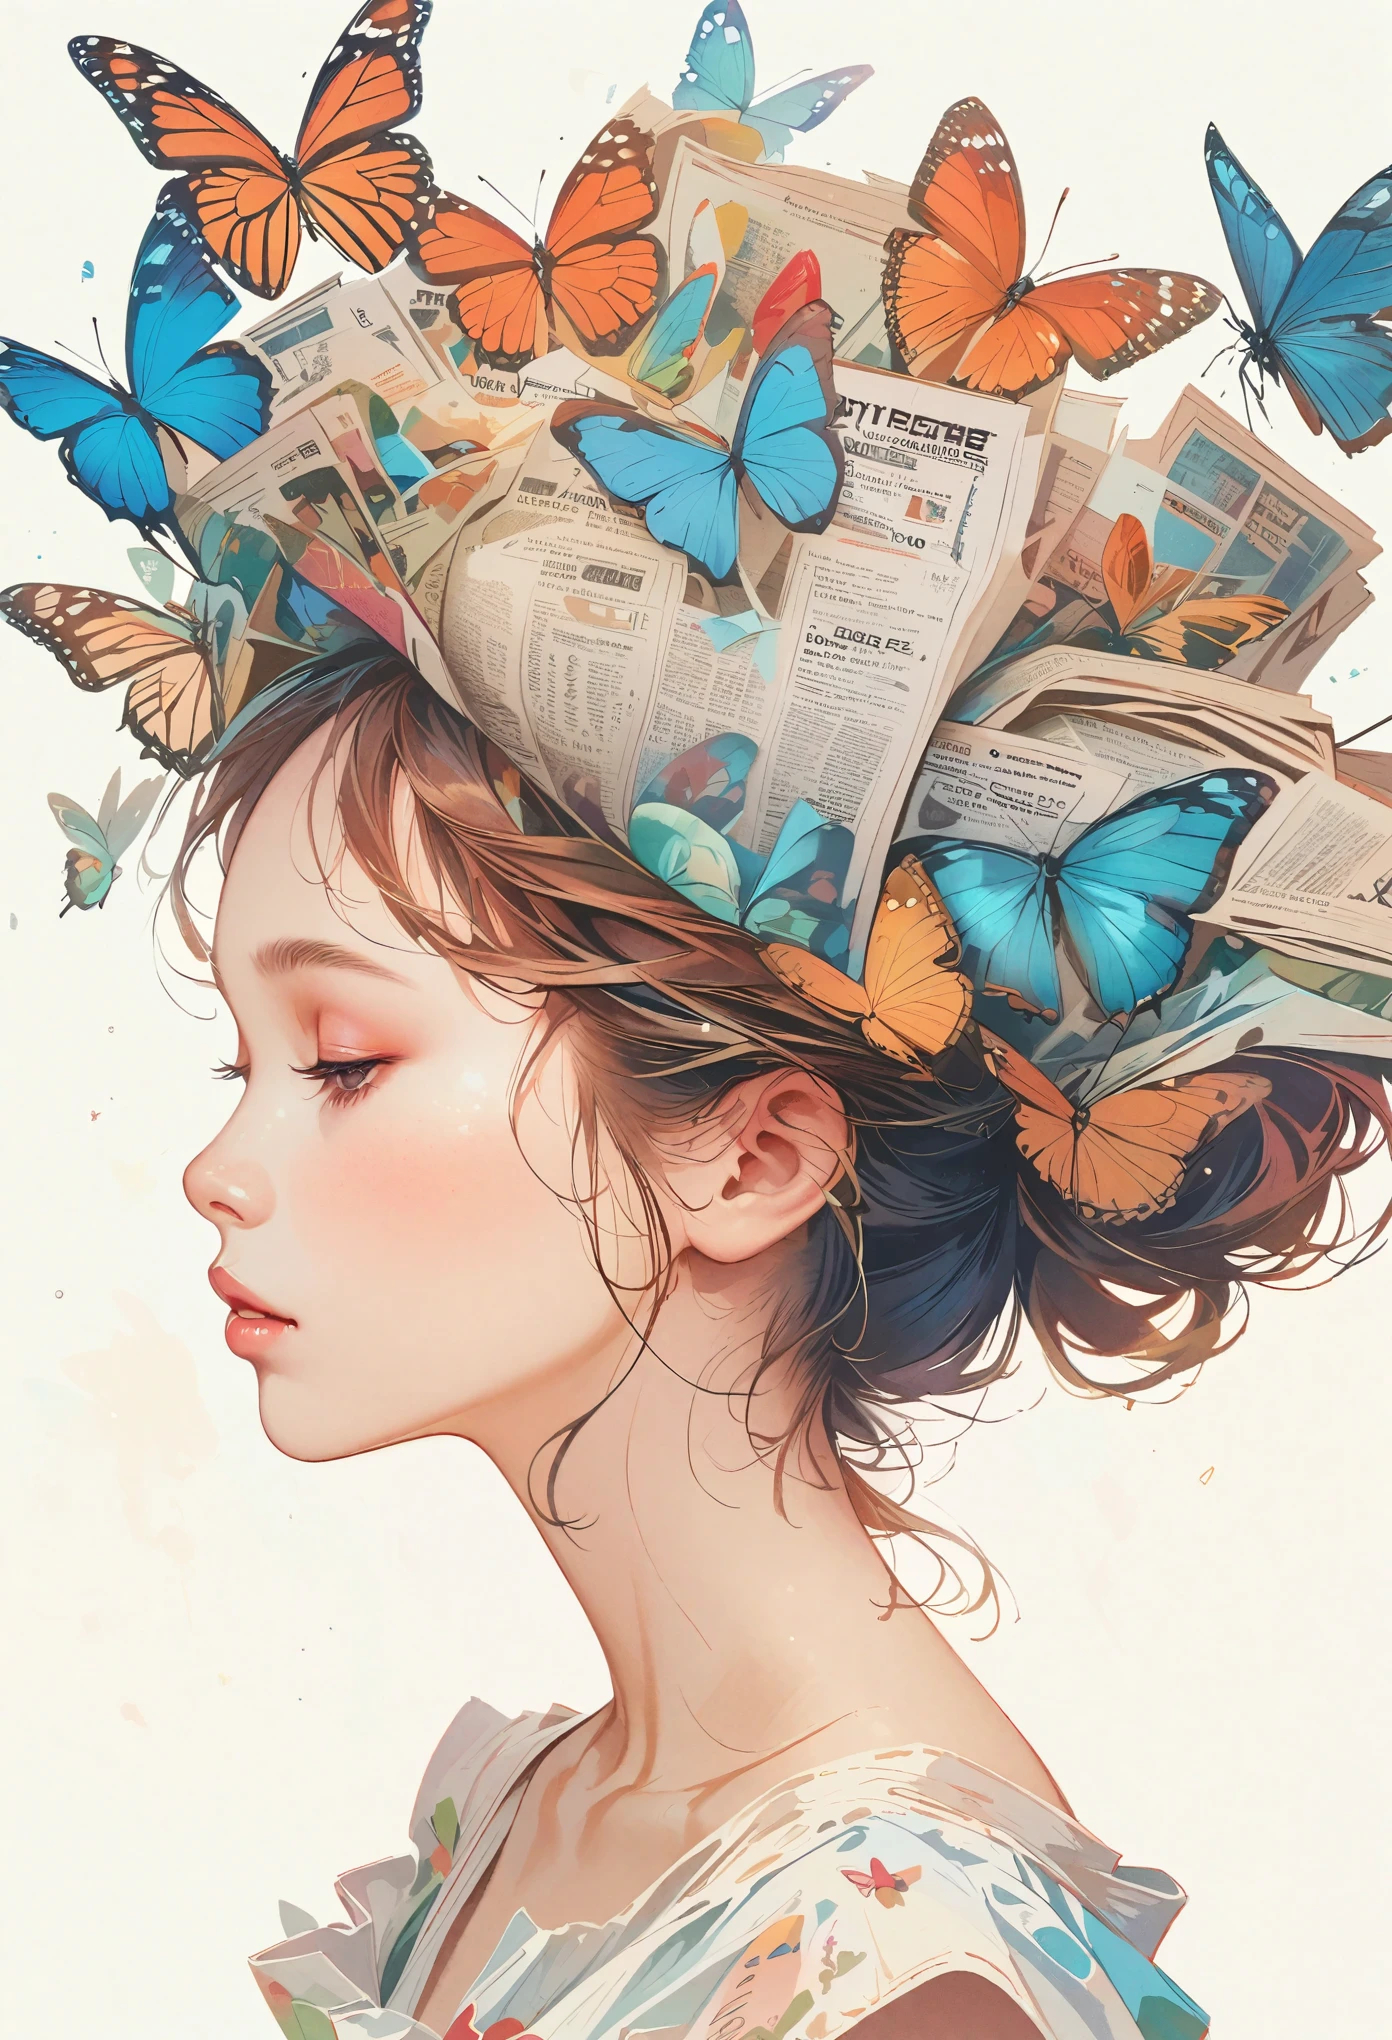 A girl with a side profile, alone, wearing a magazine cover dress, detailed facial features and long eyelashes, with a butterfly perched on her head, surrounded by an arrangement of cut-out newspaper clippings. The girl's face is photorealistic and detailed, with vivid colors and sharp focus. The overall image is a high-resolution masterpiece, suitable for a magazine cover. The art style is a mix of photography and concept art. The color tone is vibrant and eye-catching. The lighting is studio-style, with soft and gentle illumination. The prompt also includes the text and barcode typically seen on magazine covers.